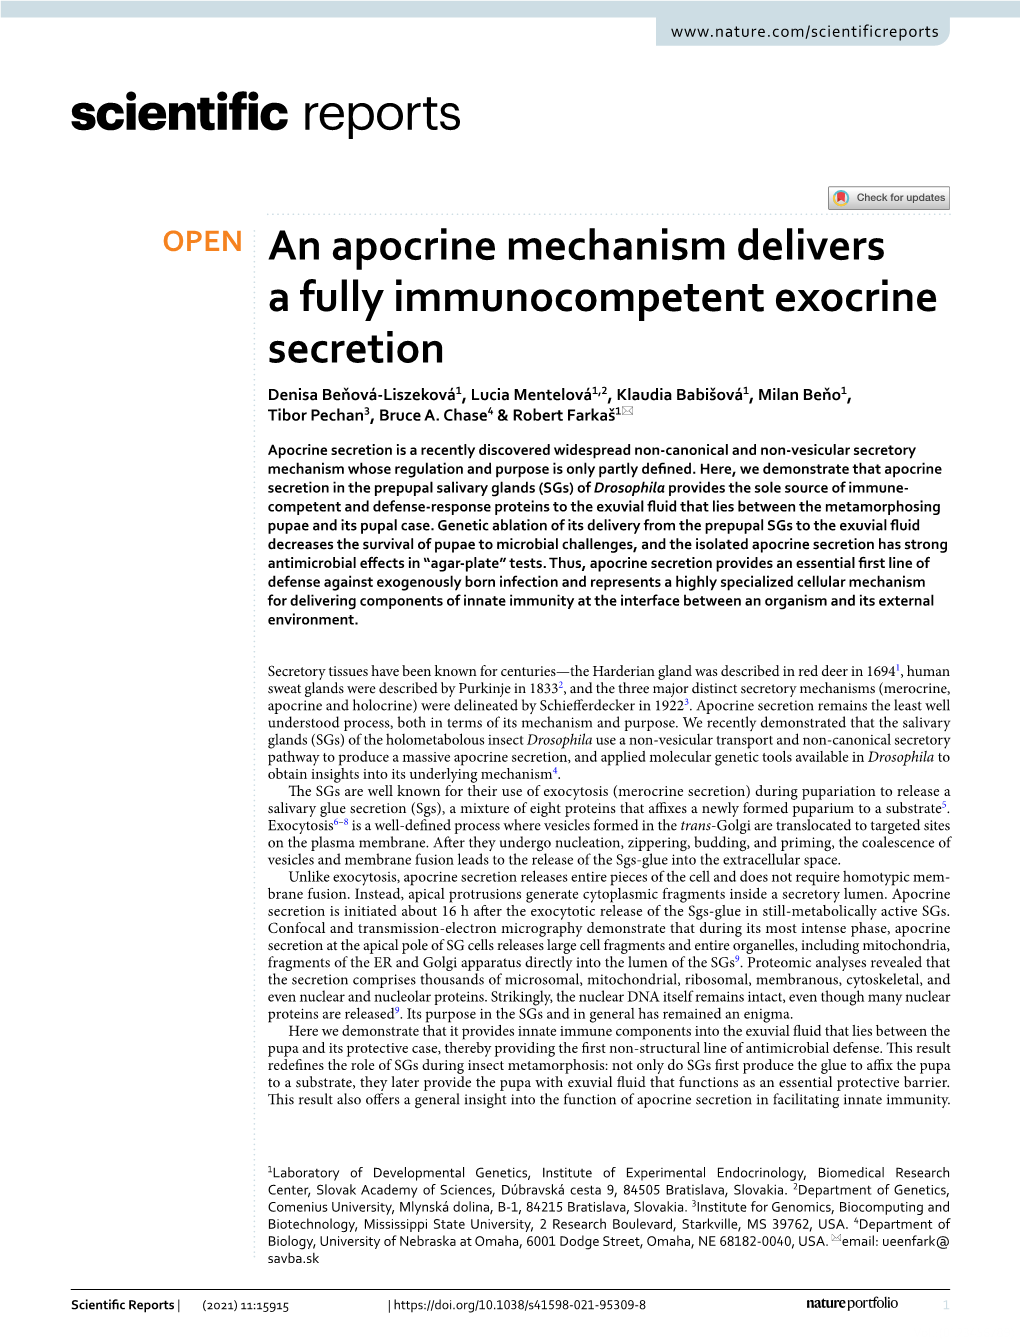 An Apocrine Mechanism Delivers a Fully Immunocompetent Exocrine